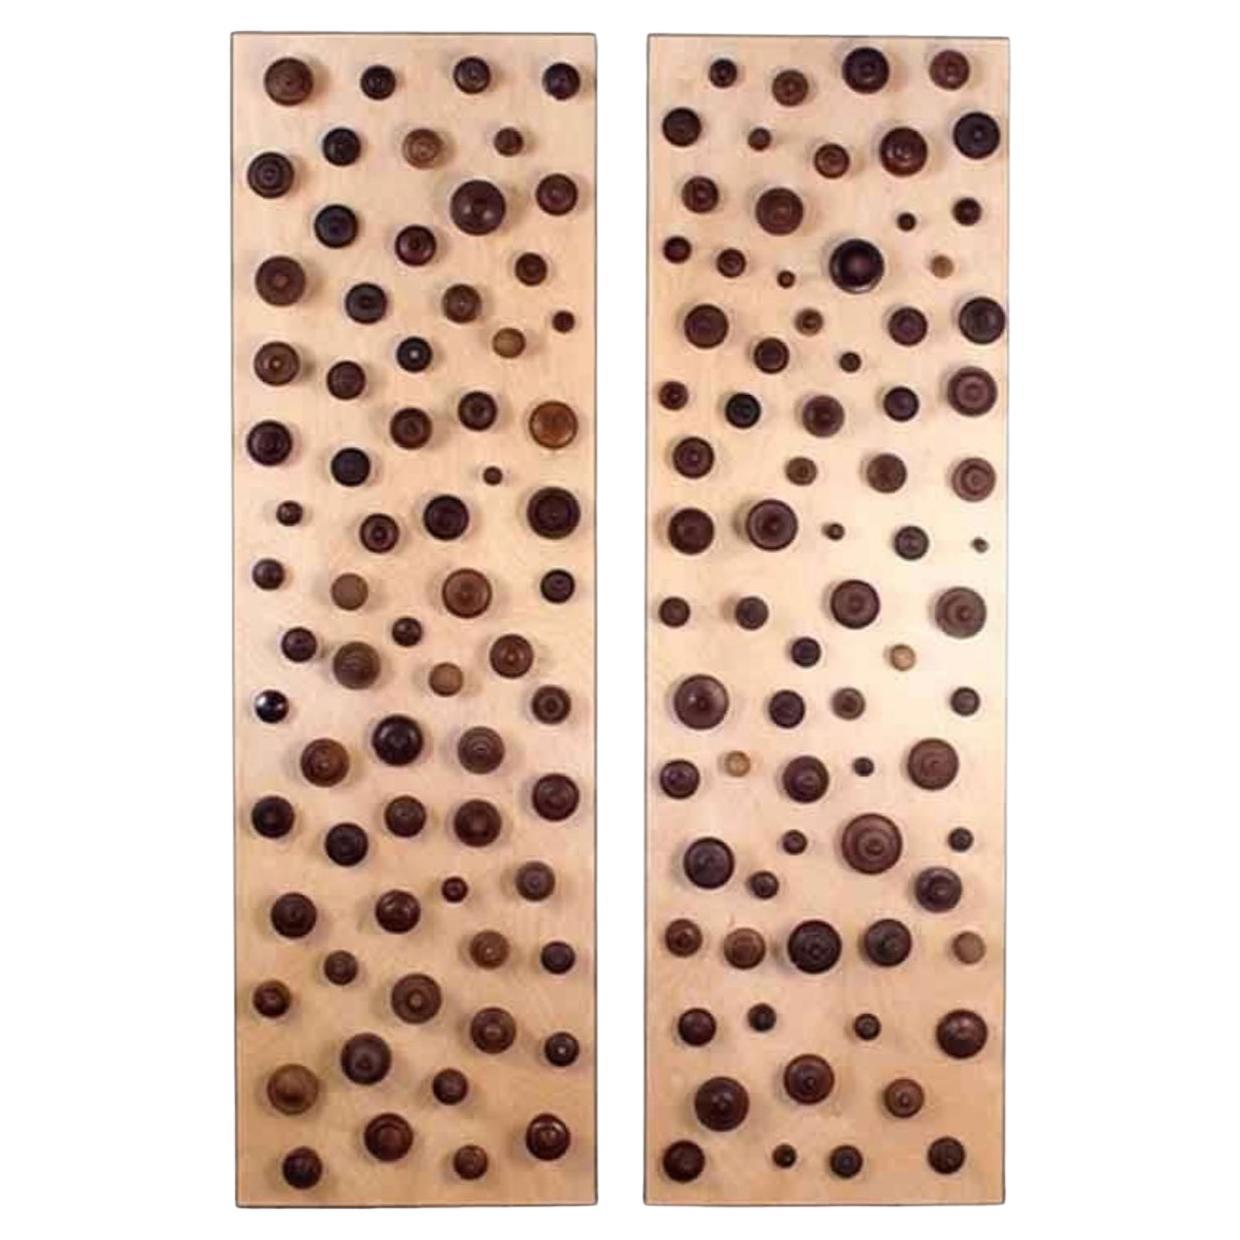 'Boucliers' Pair of Decorative Turned Wood Panels by Eric Thévenot